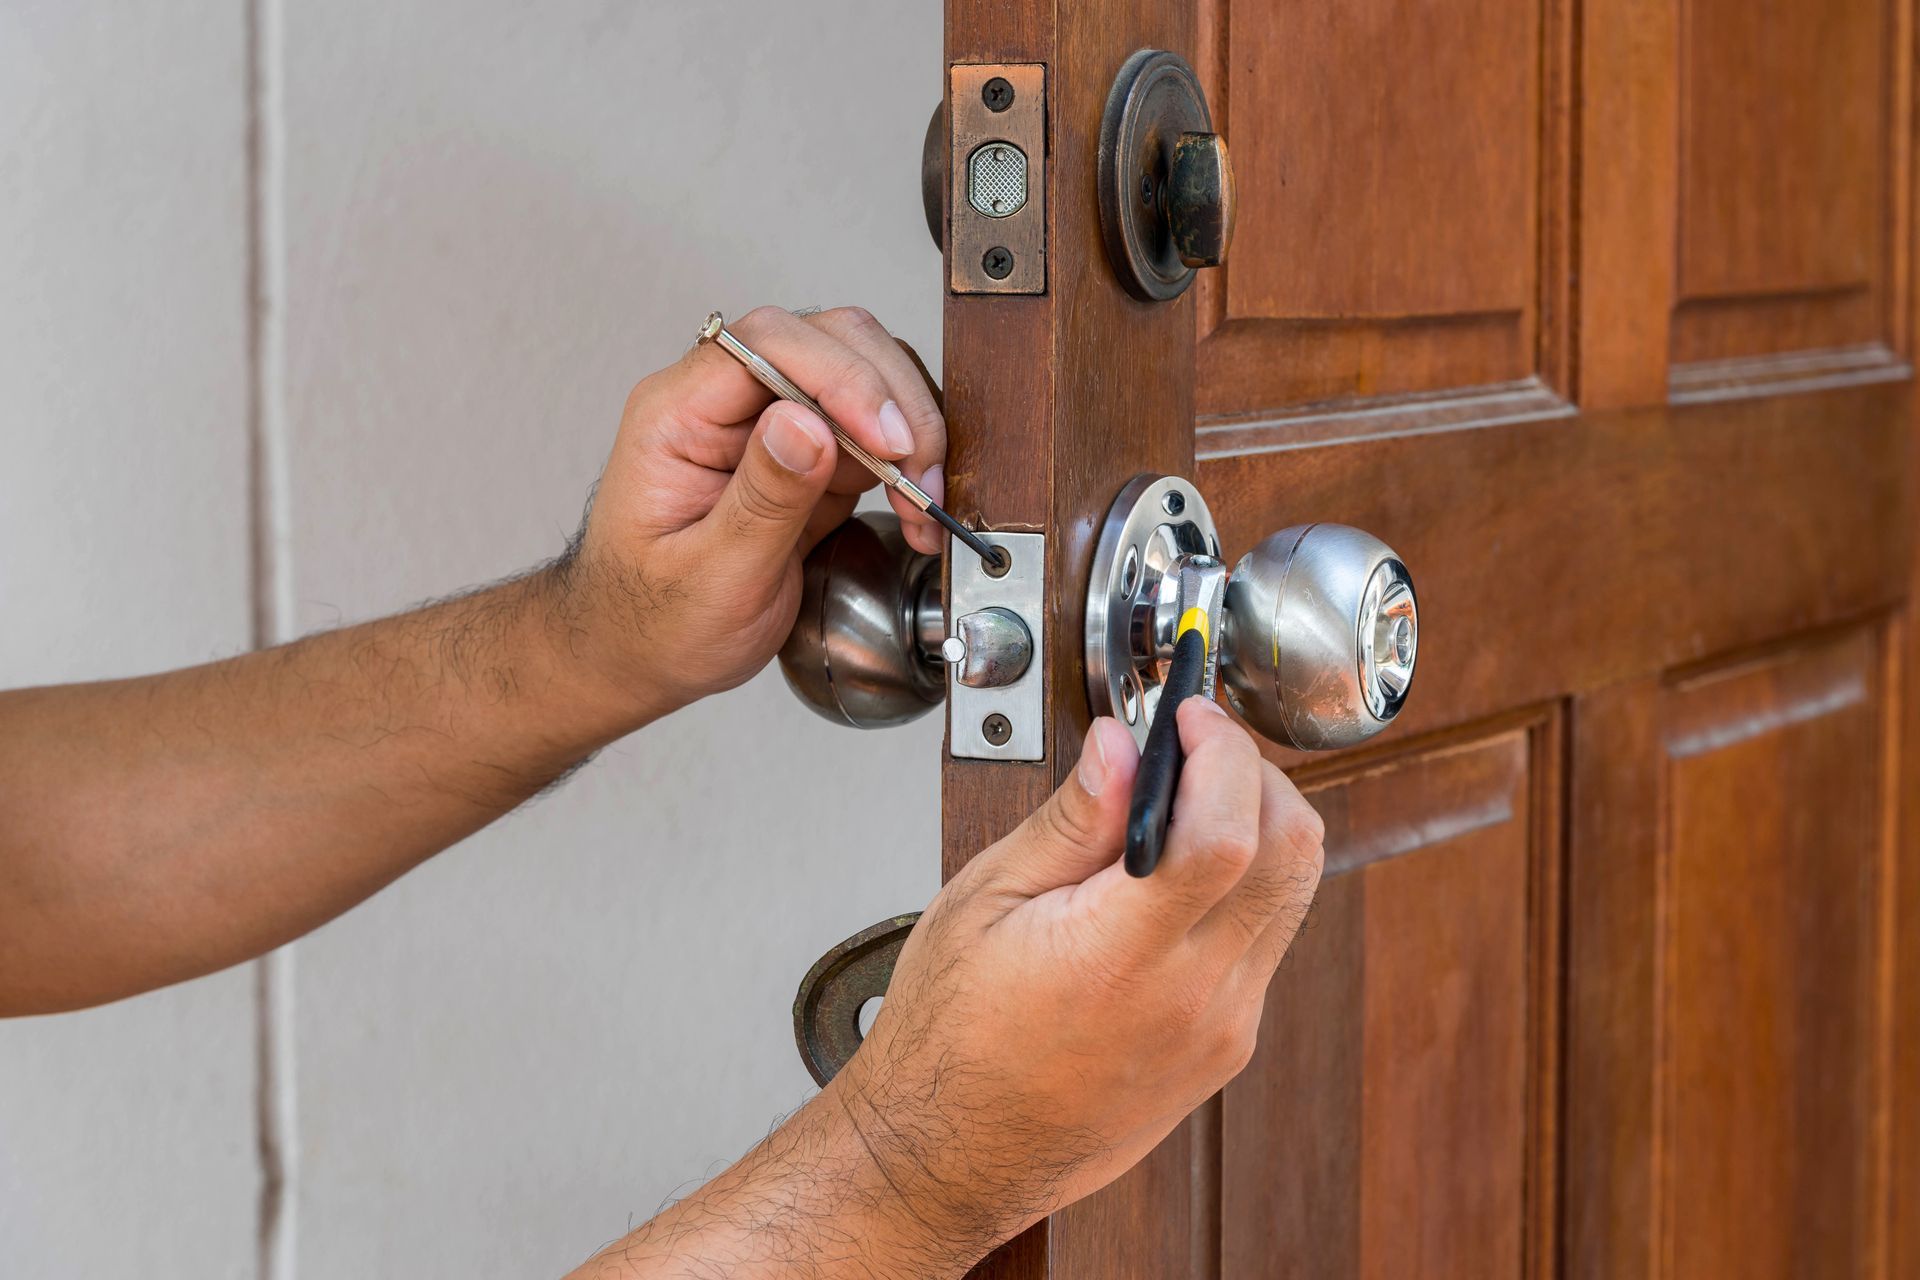 A man is fixing a door knob with a screwdriver.